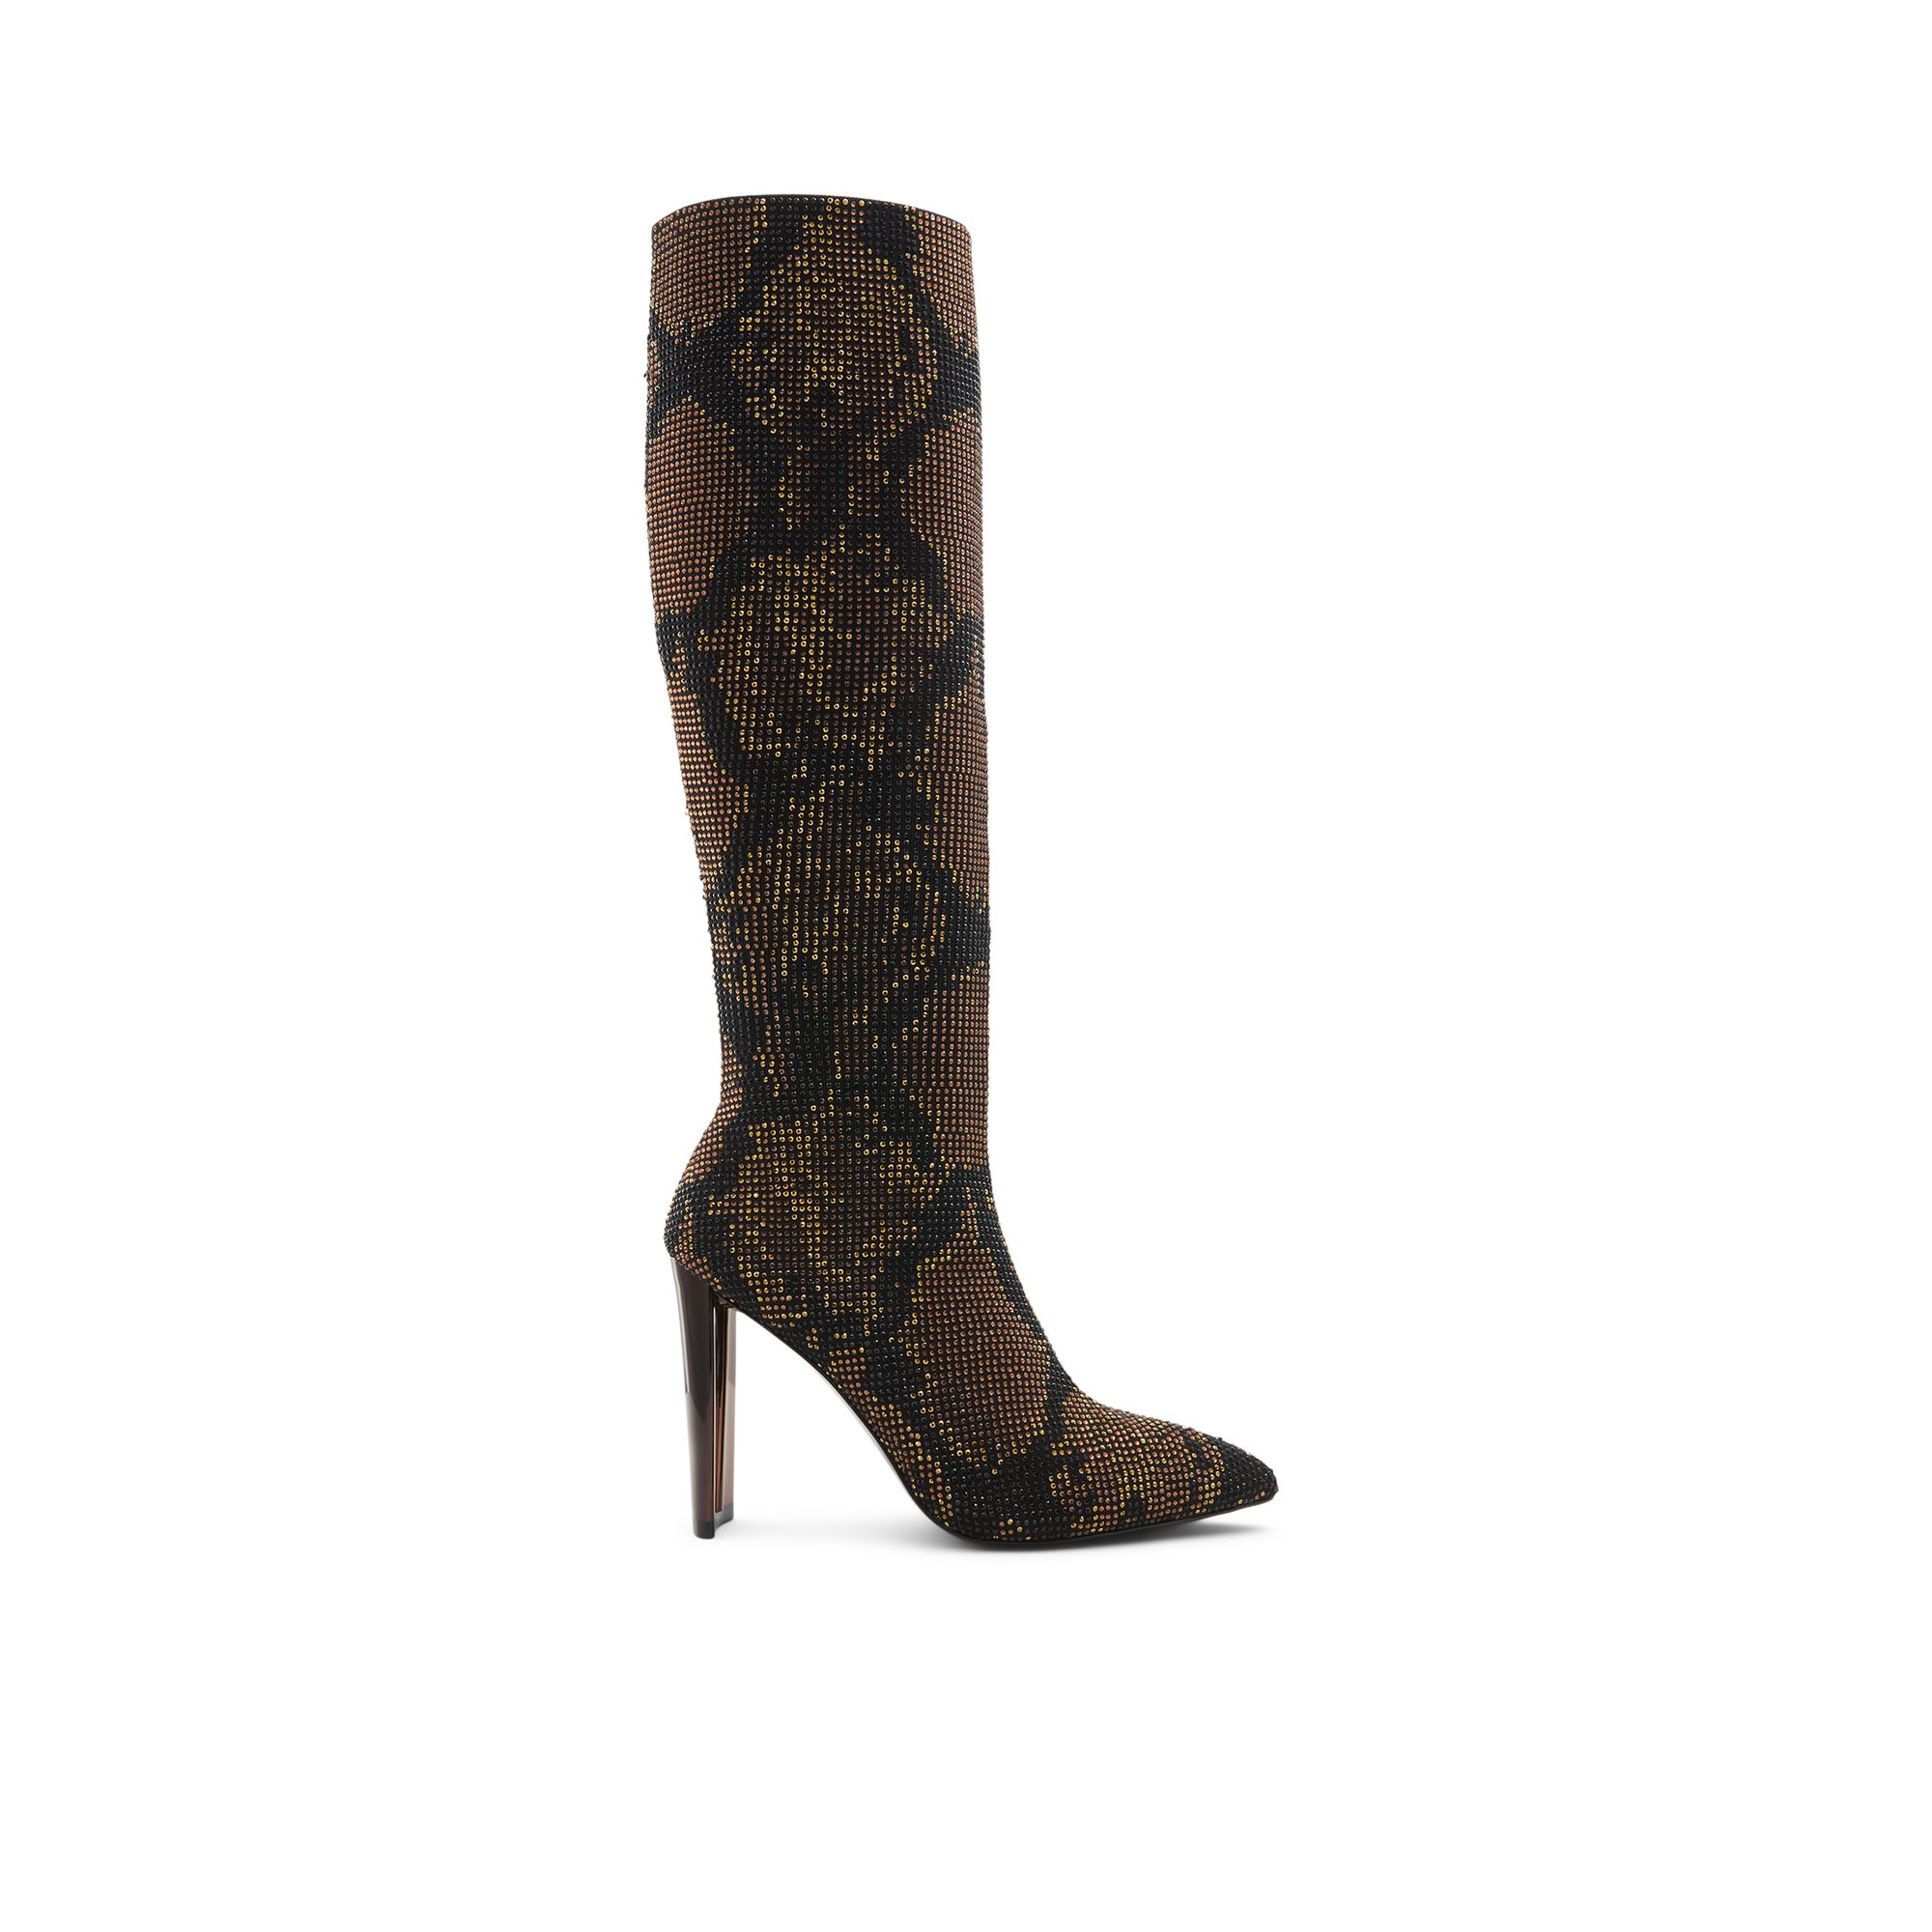 Image of ALDO Gwenith - Women's Knee-High Boot - Brown, Size 8.5